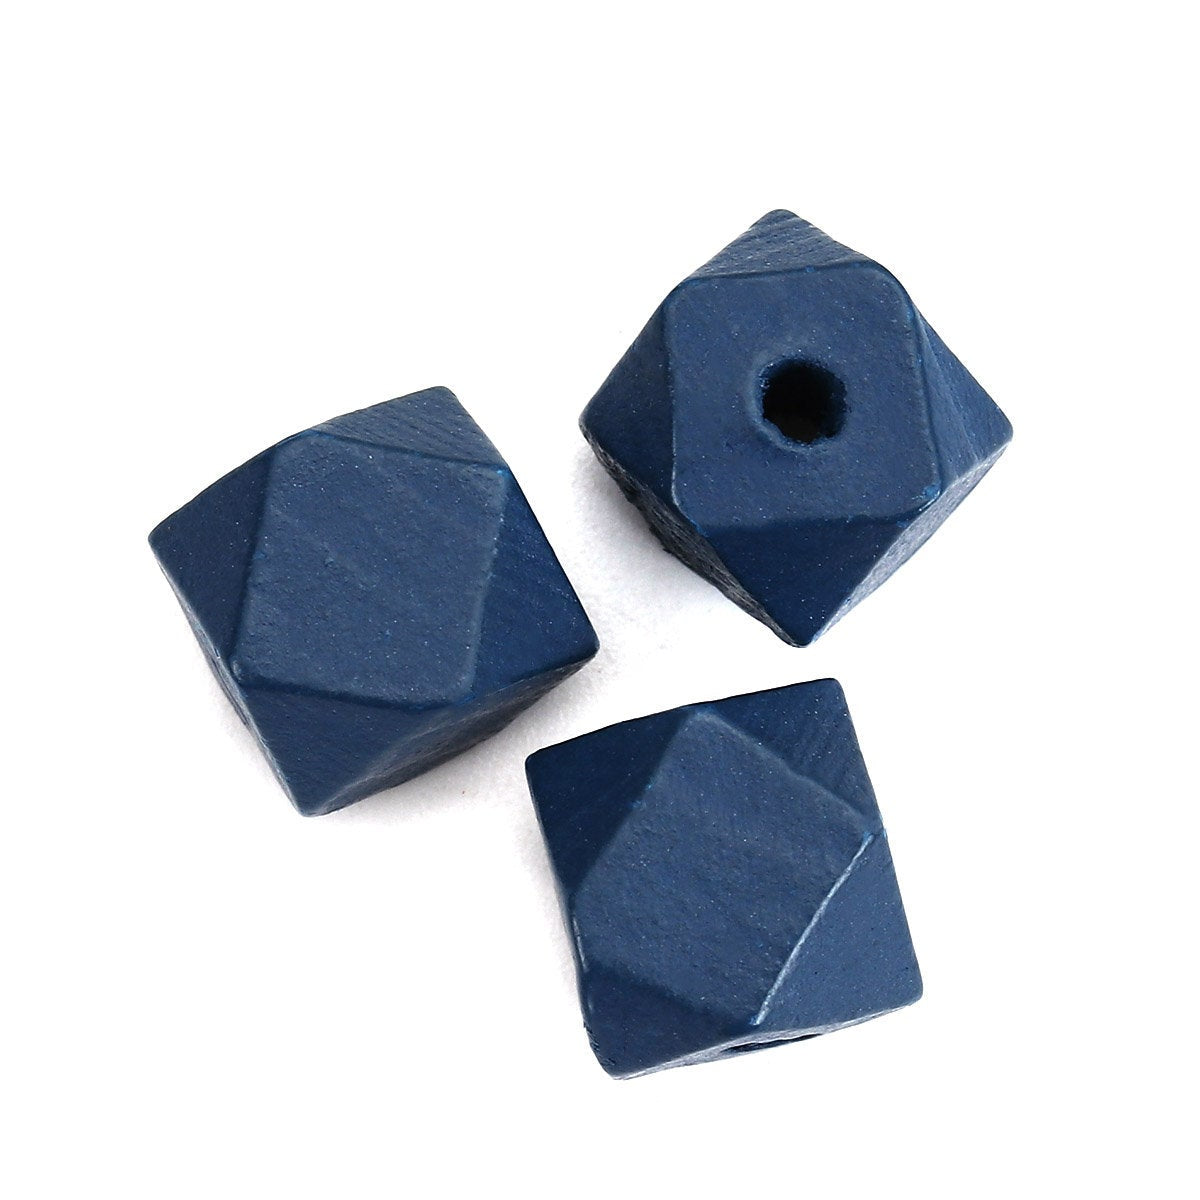 10 Faceted hexagon wood beads 12mm - Gray, blue, black and brown